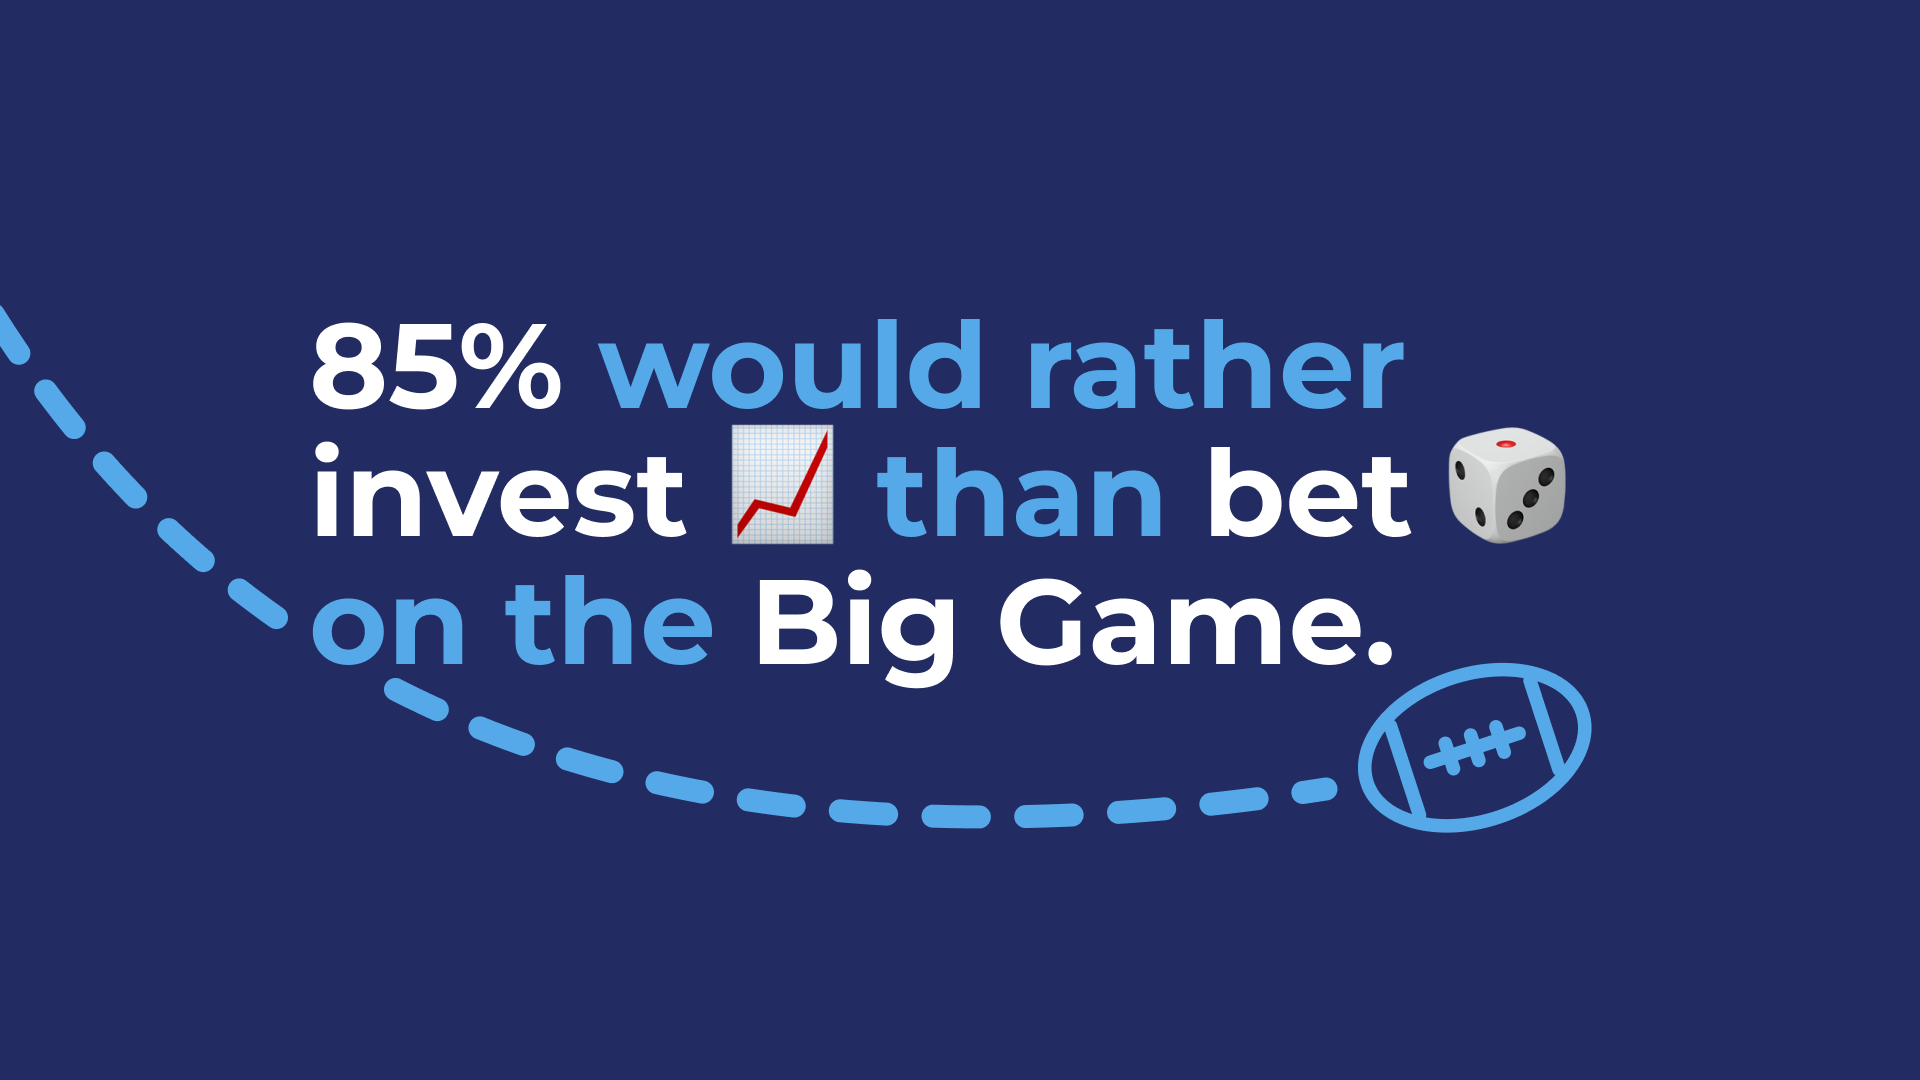 "85% would rather invest [chart emoji] than bet [dice emoji] on the Big Game."